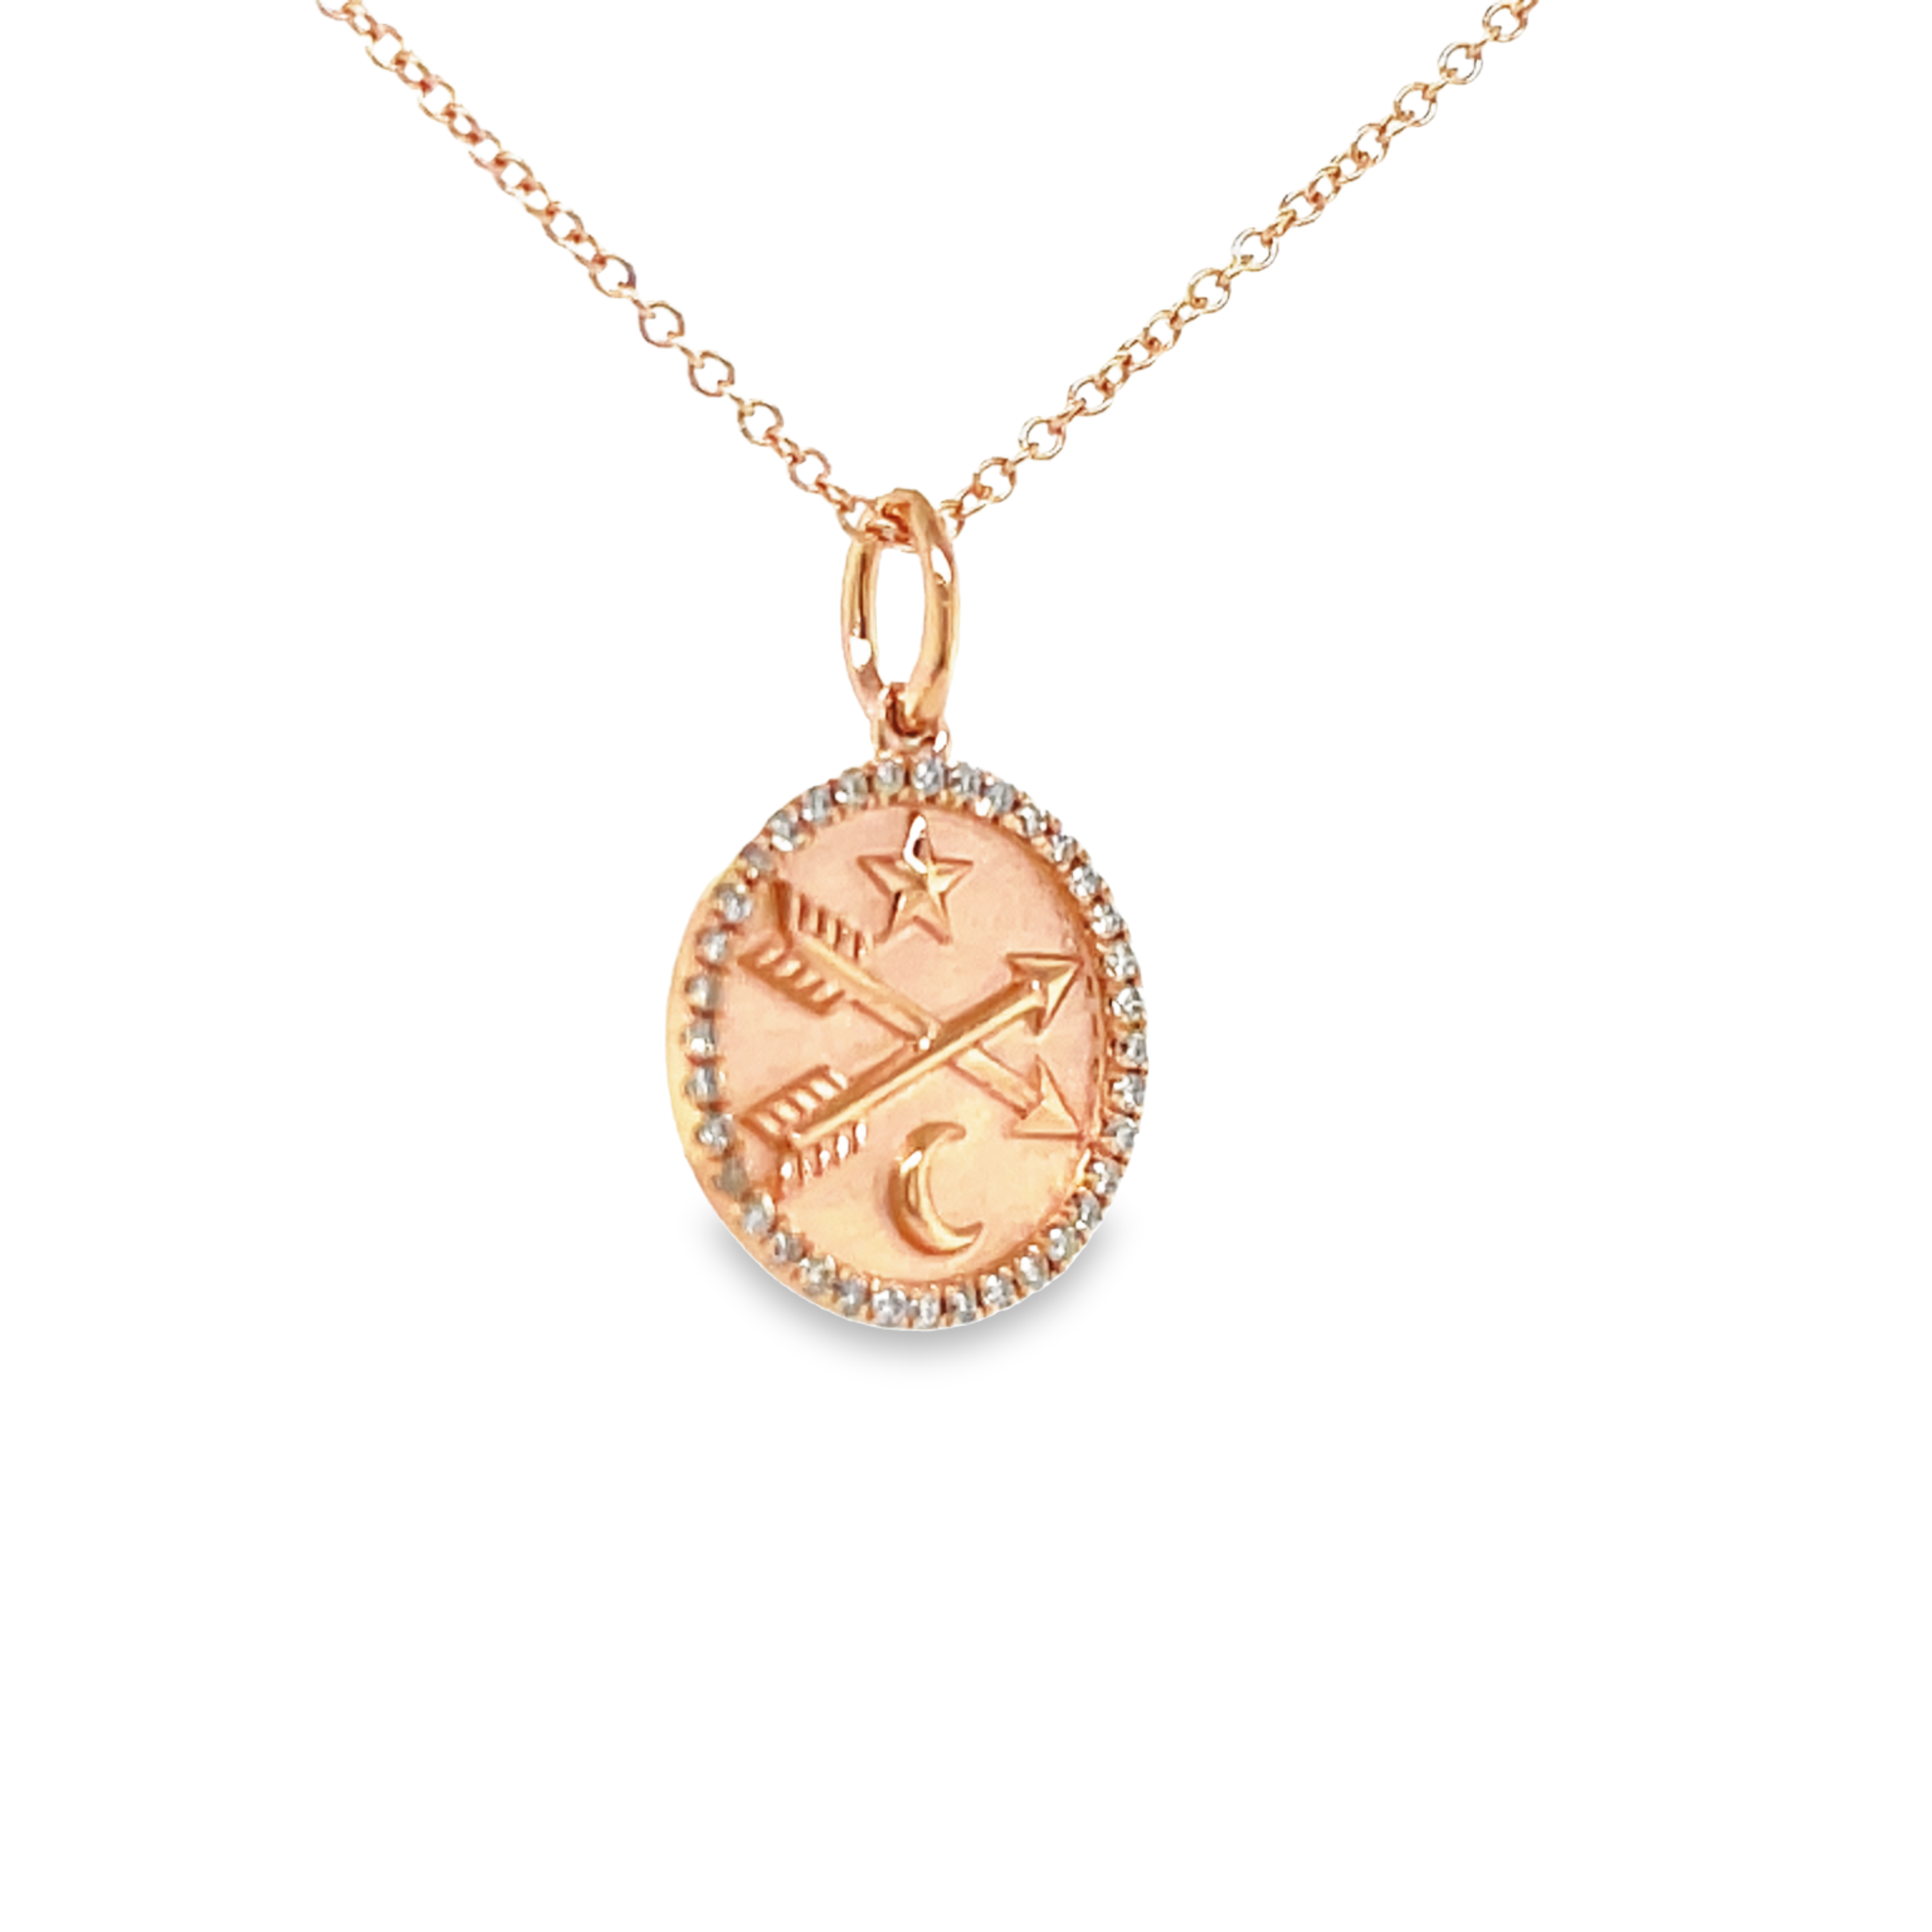 A beautiful symbol of friendship and love, this pendant is a must-have! Two arrows represent the meaning of the piece: "Happy that our paths crossed". The 14k rose gold medallion is adorned with 0.12 cts of round diamonds for an extra sparkle. At 18.00 mm in length (including the secure bail), this piece is sure to be treasured for years to come! A 16" 1.1 mm optional gold chain is available for $199.00.